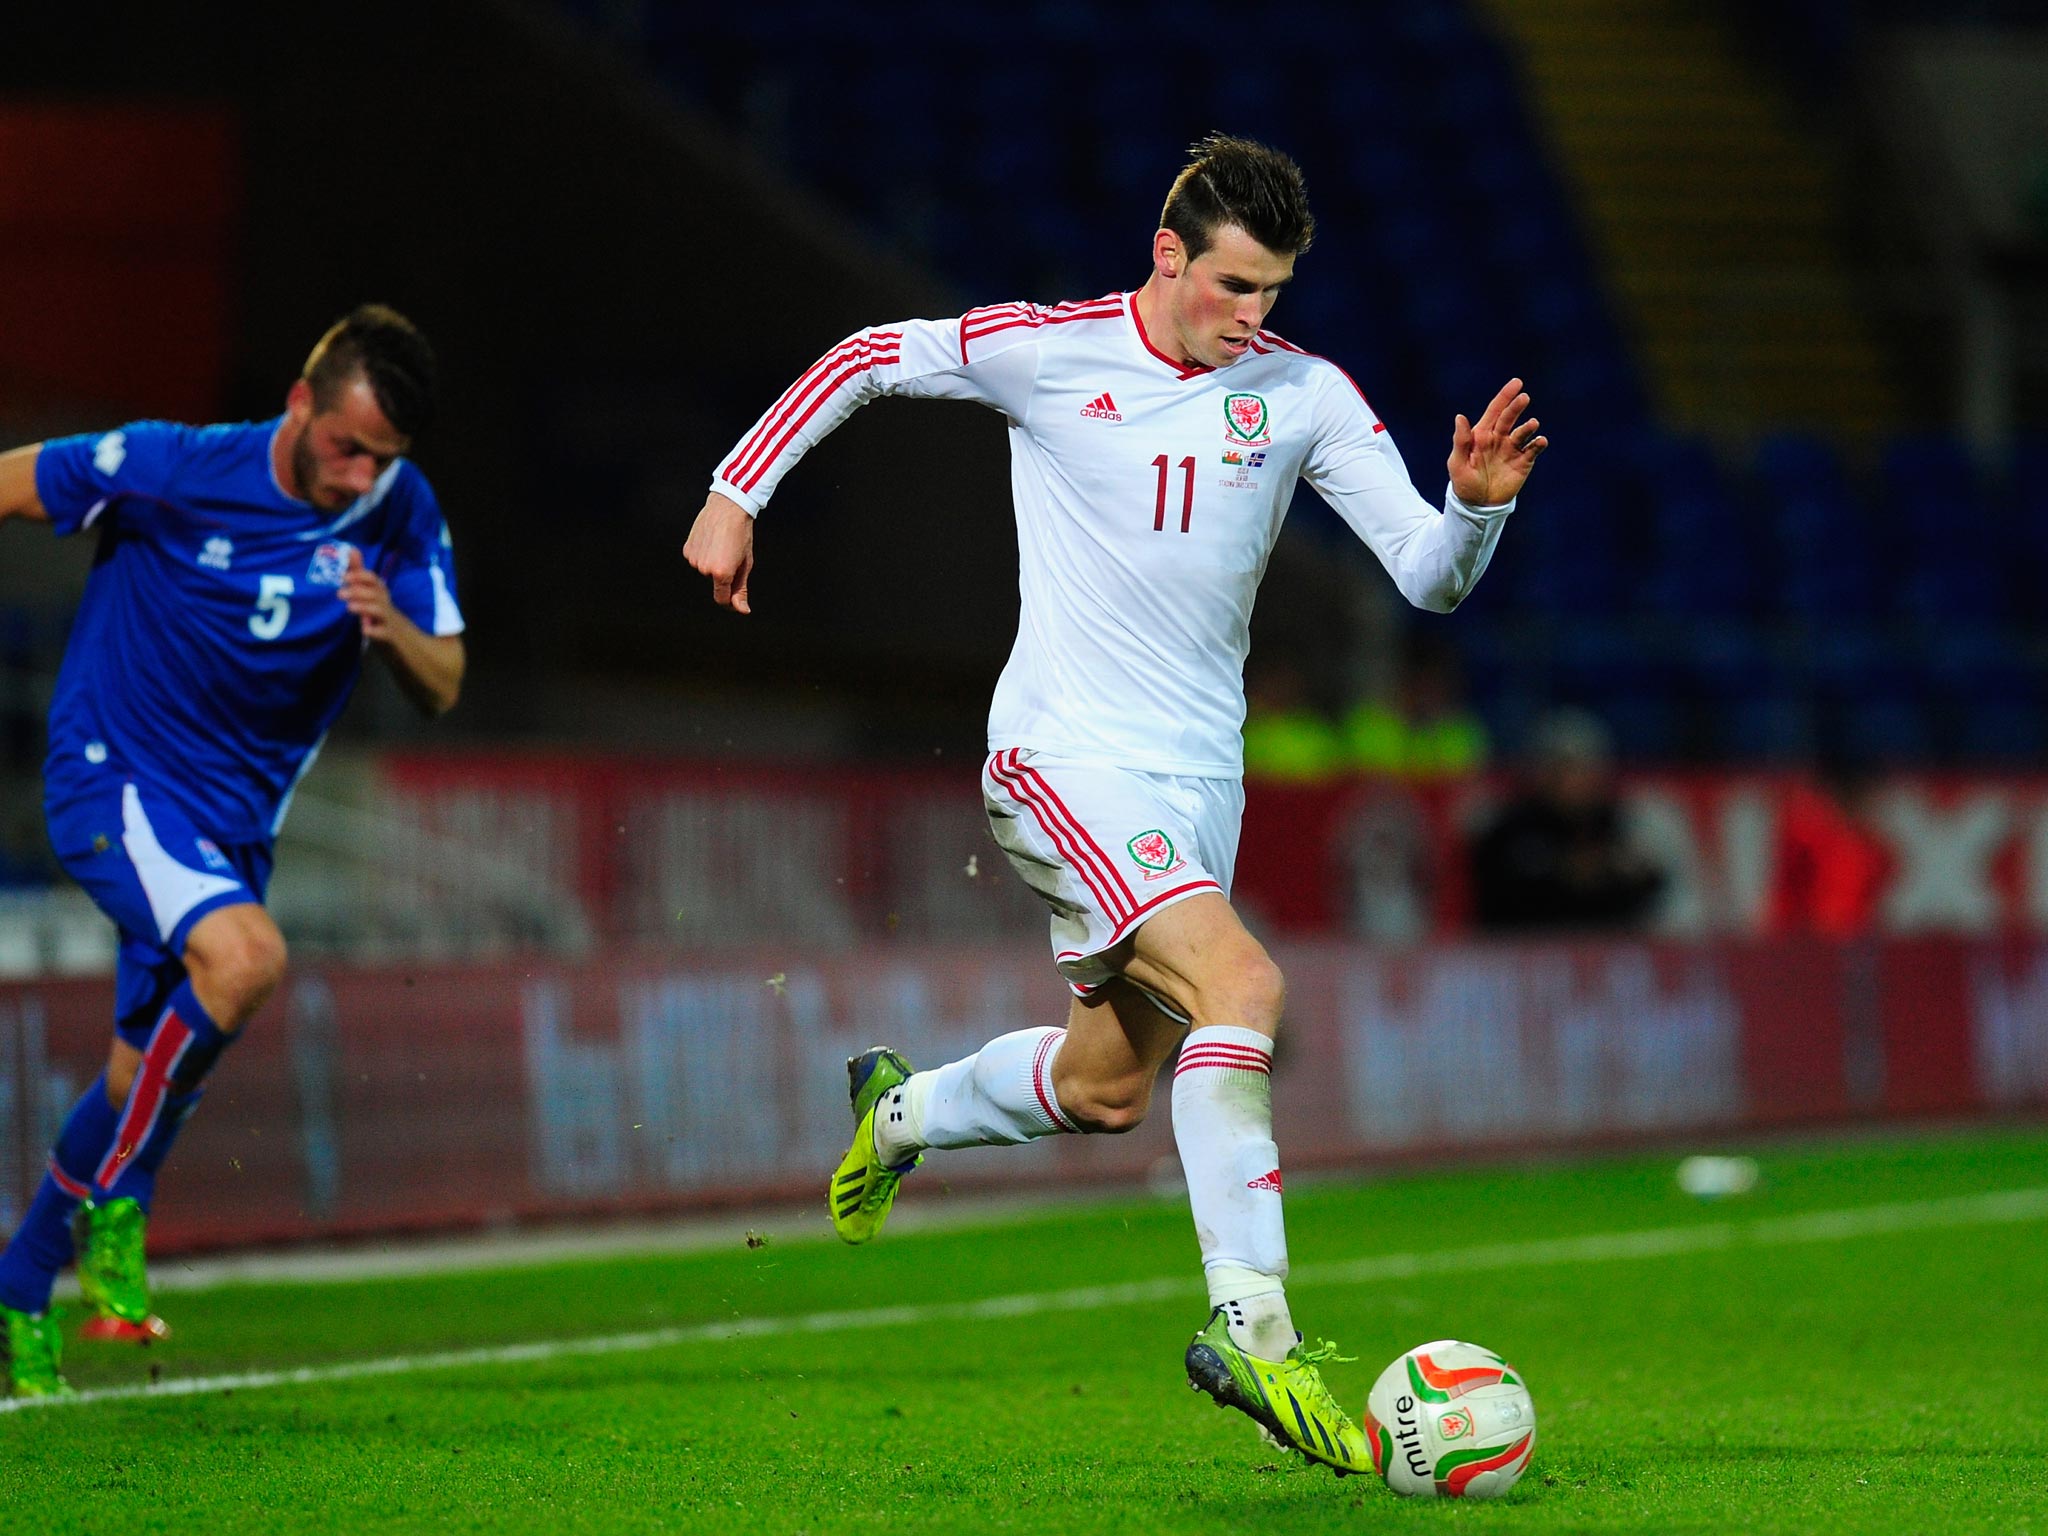 Gareth Bale starred in Wales' 3-1 win over Iceland